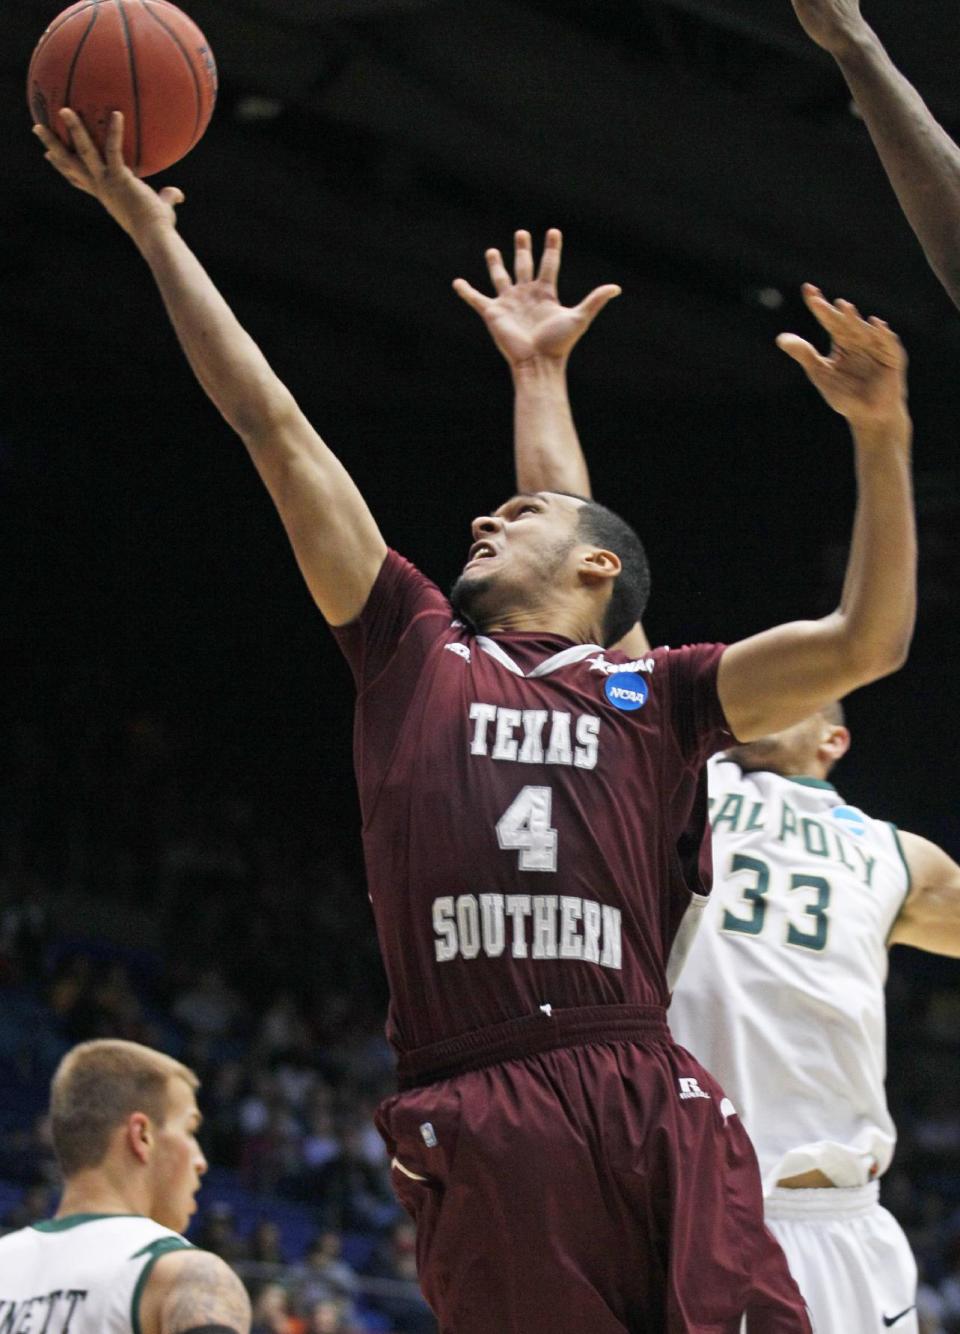 Texas Southern forward Jose Rodriguez (4) drives past Cal Poly forward Chris Eversley (33) in the first half of a first-round game of the NCAA college basketball tournament on Wednesday, March 19, 2014, in Dayton, Ohio. (AP Photo/Skip Peterson)